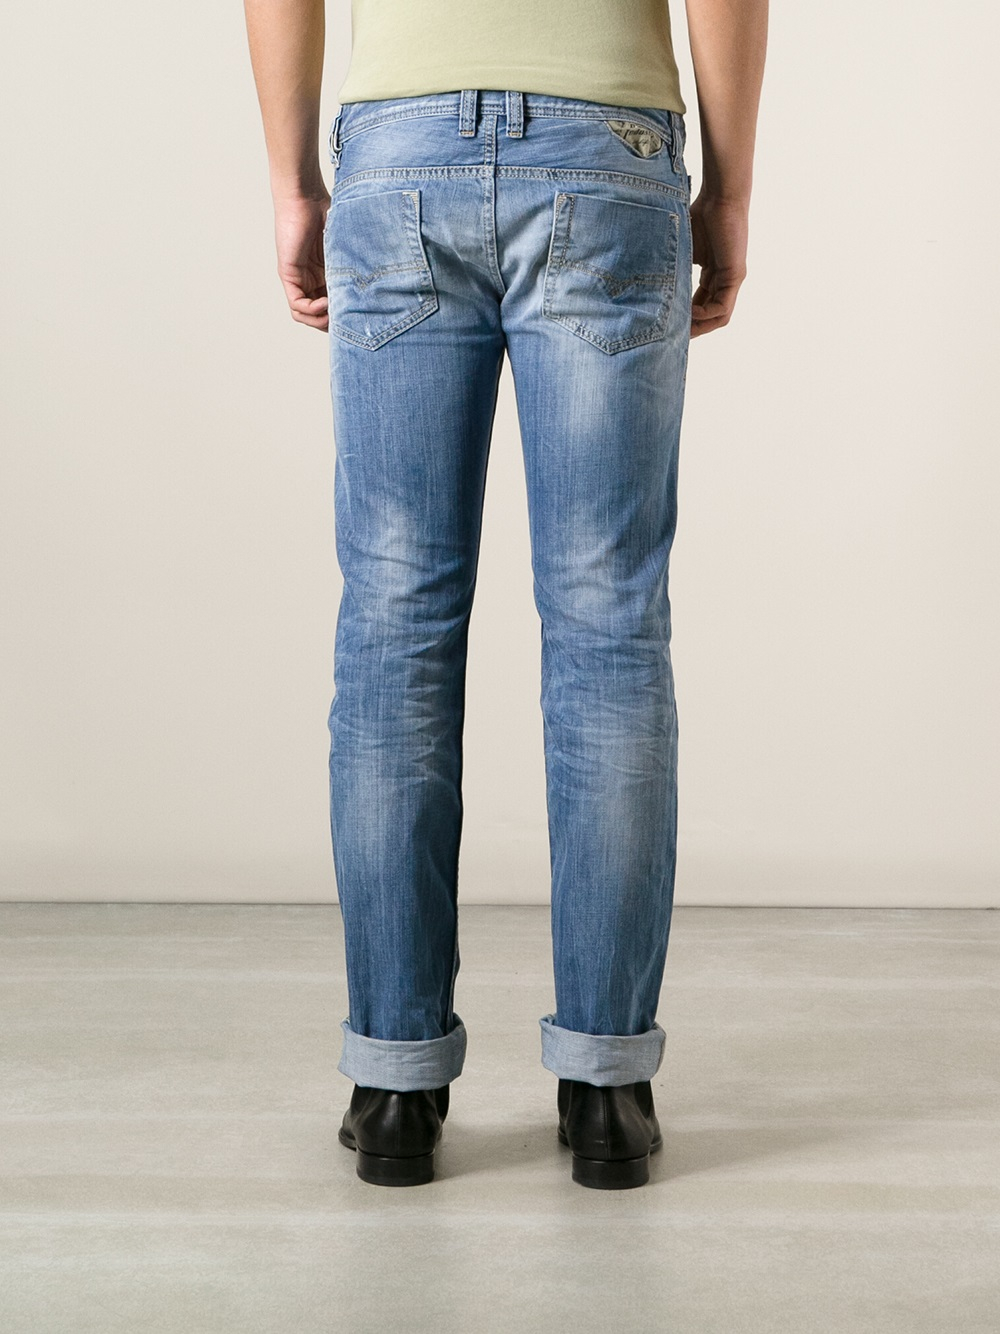 DIESEL Stone Washed Jeans in Blue for Men - Lyst